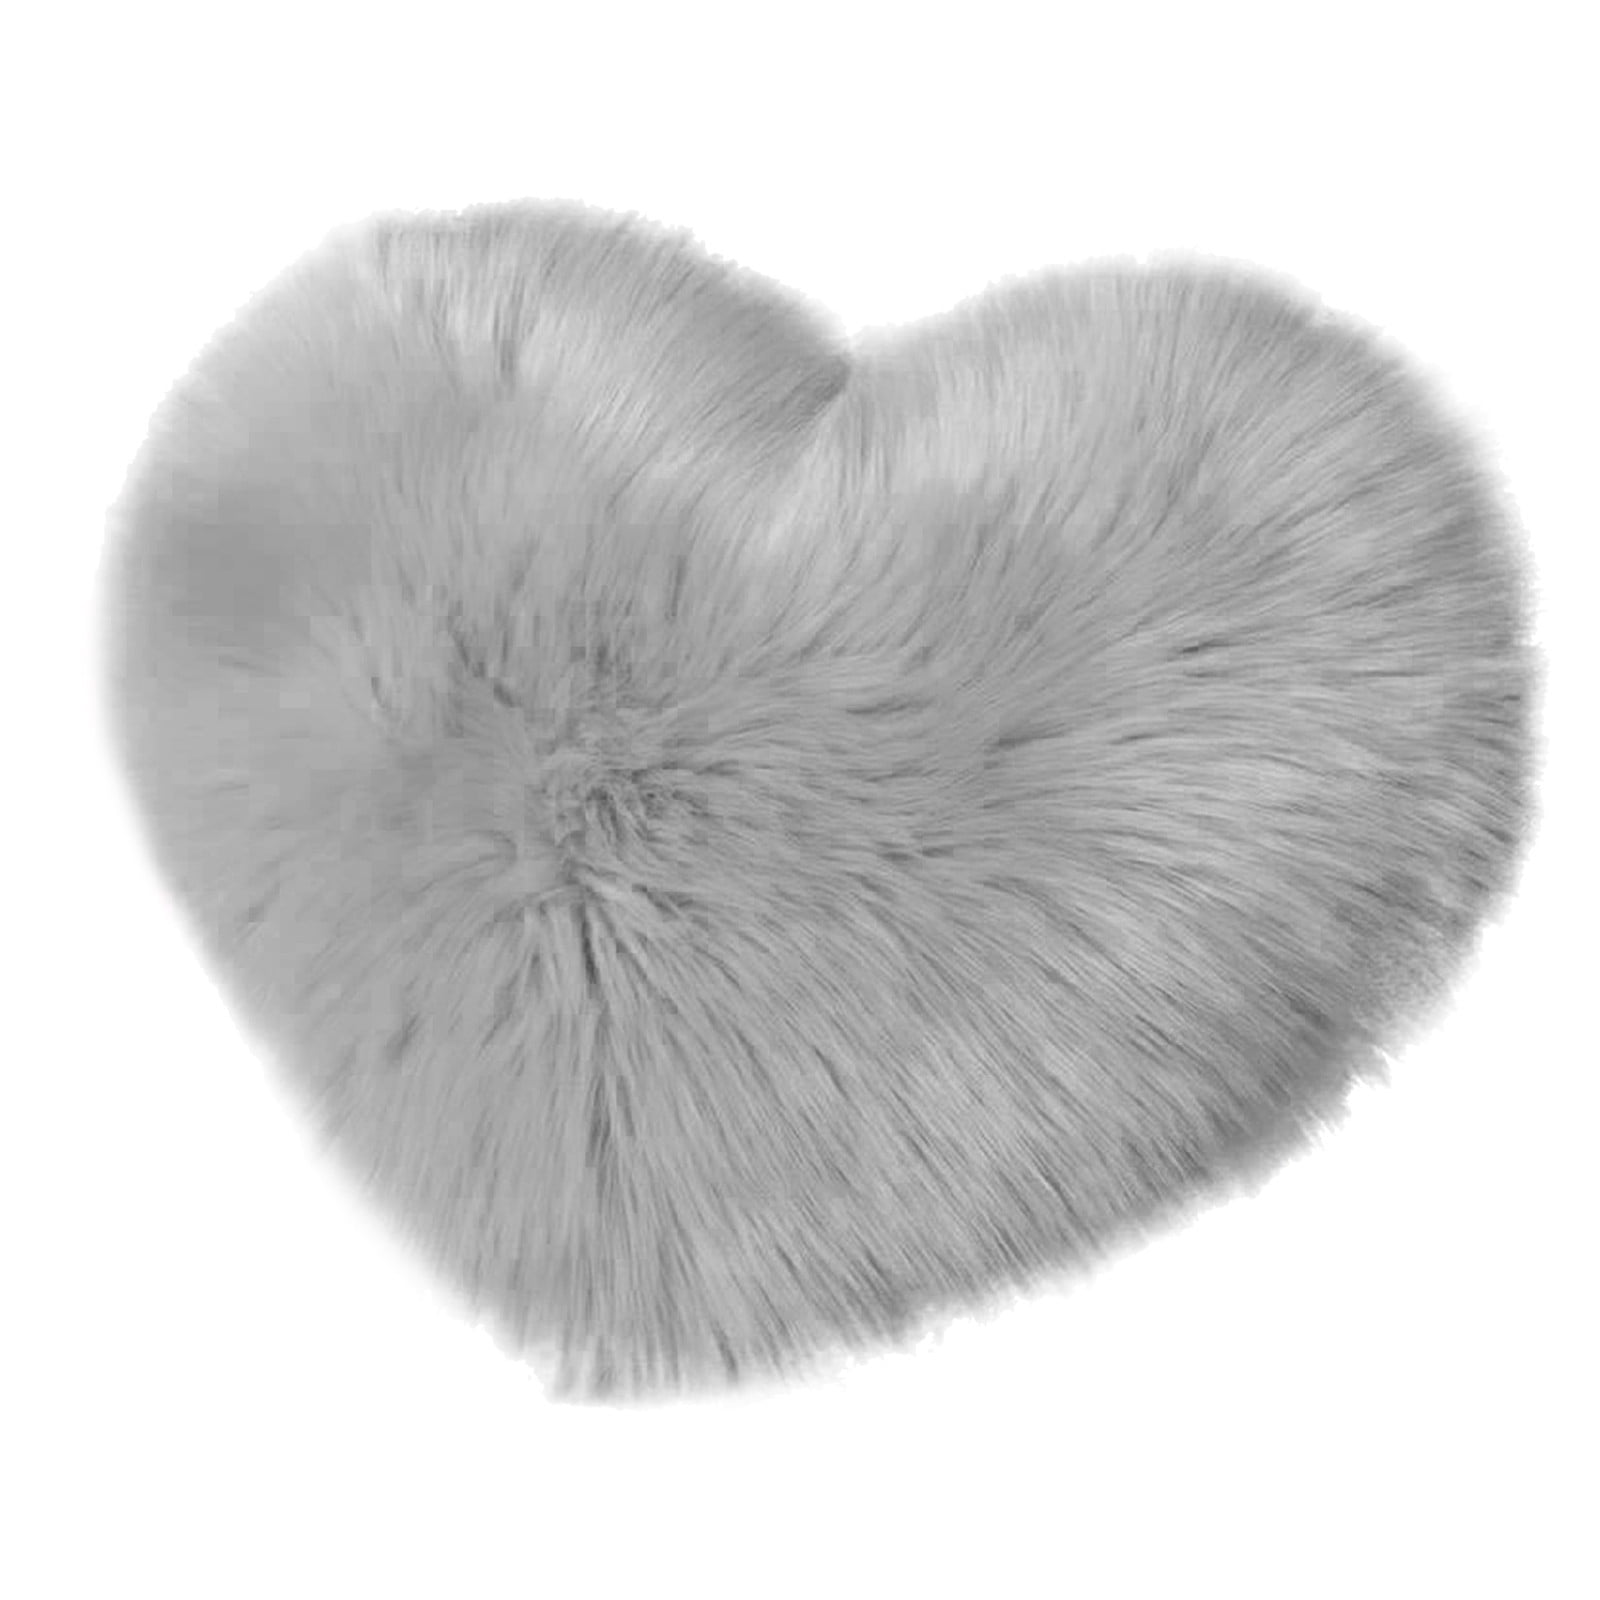 Unittype Heart Throw Pillow 2 Pieces 20 x 15.7 Inch Faux Bunny Fur  Decorative Pillow Heart Shaped Fluffy Pillows Soft Cute Pillows for Bedroom